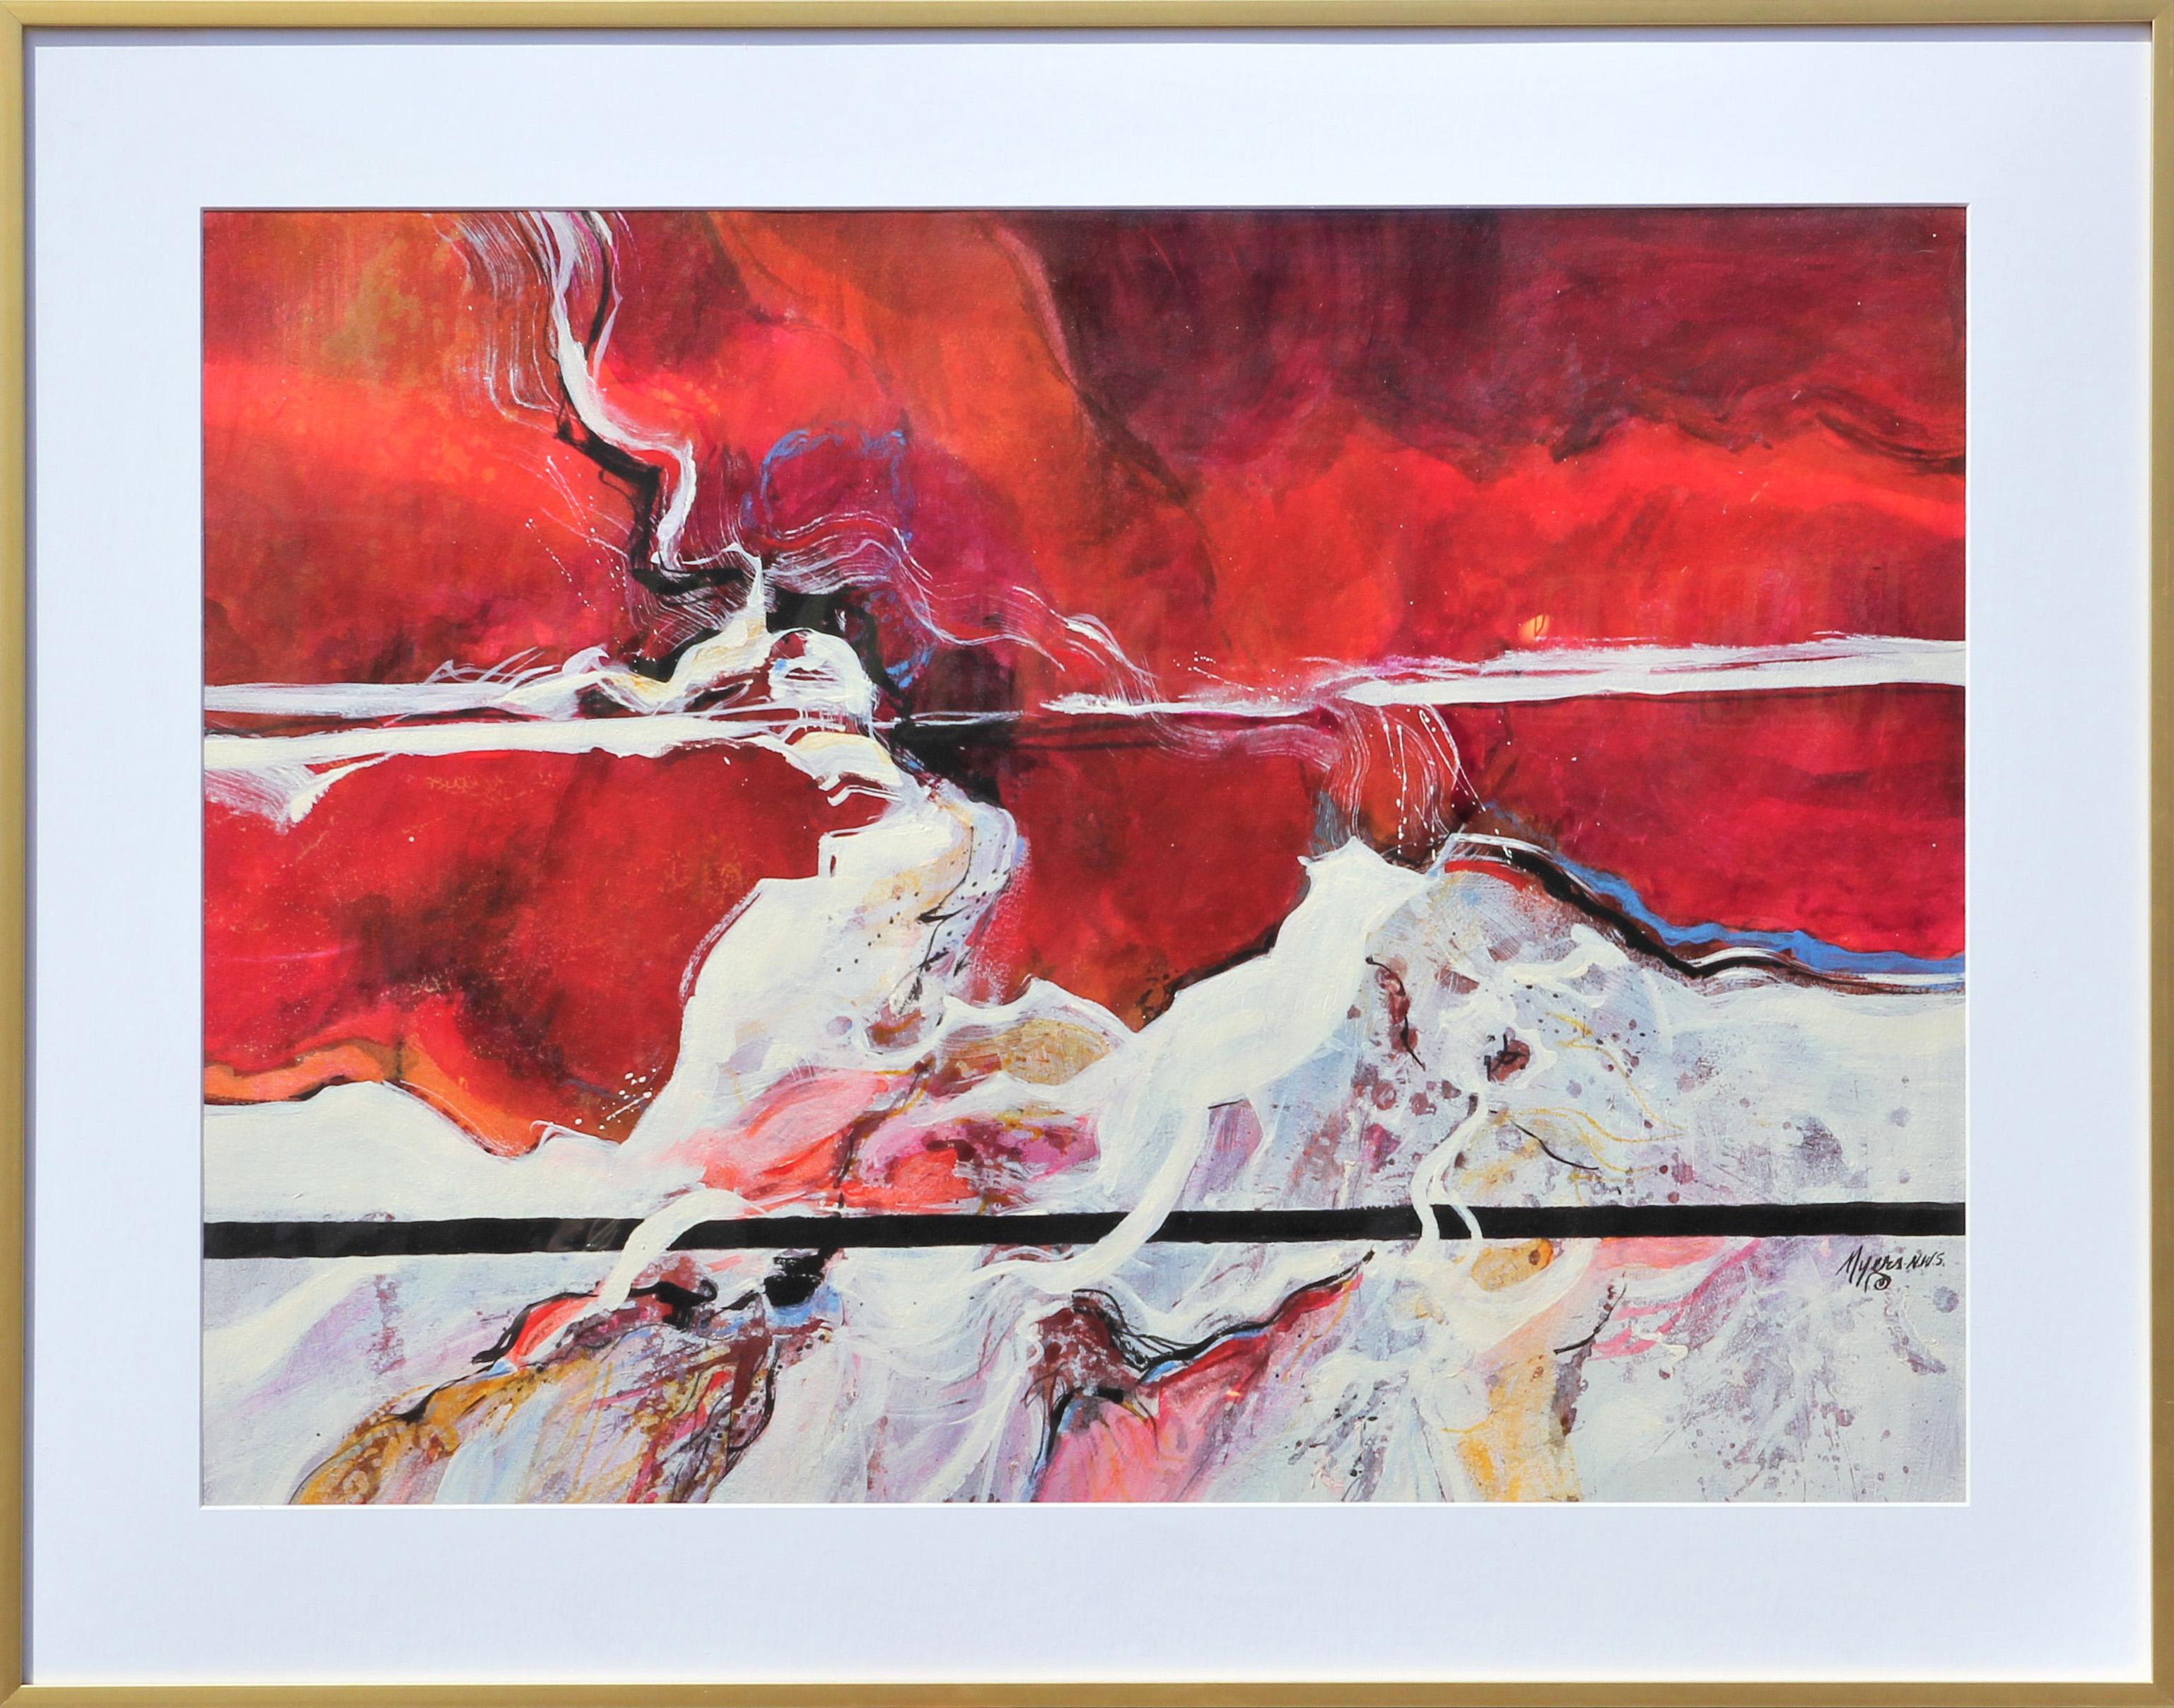 Abstract Painting Carole Myers - Peinture expressionniste abstraite moderne rouge et blanche "Firedance"